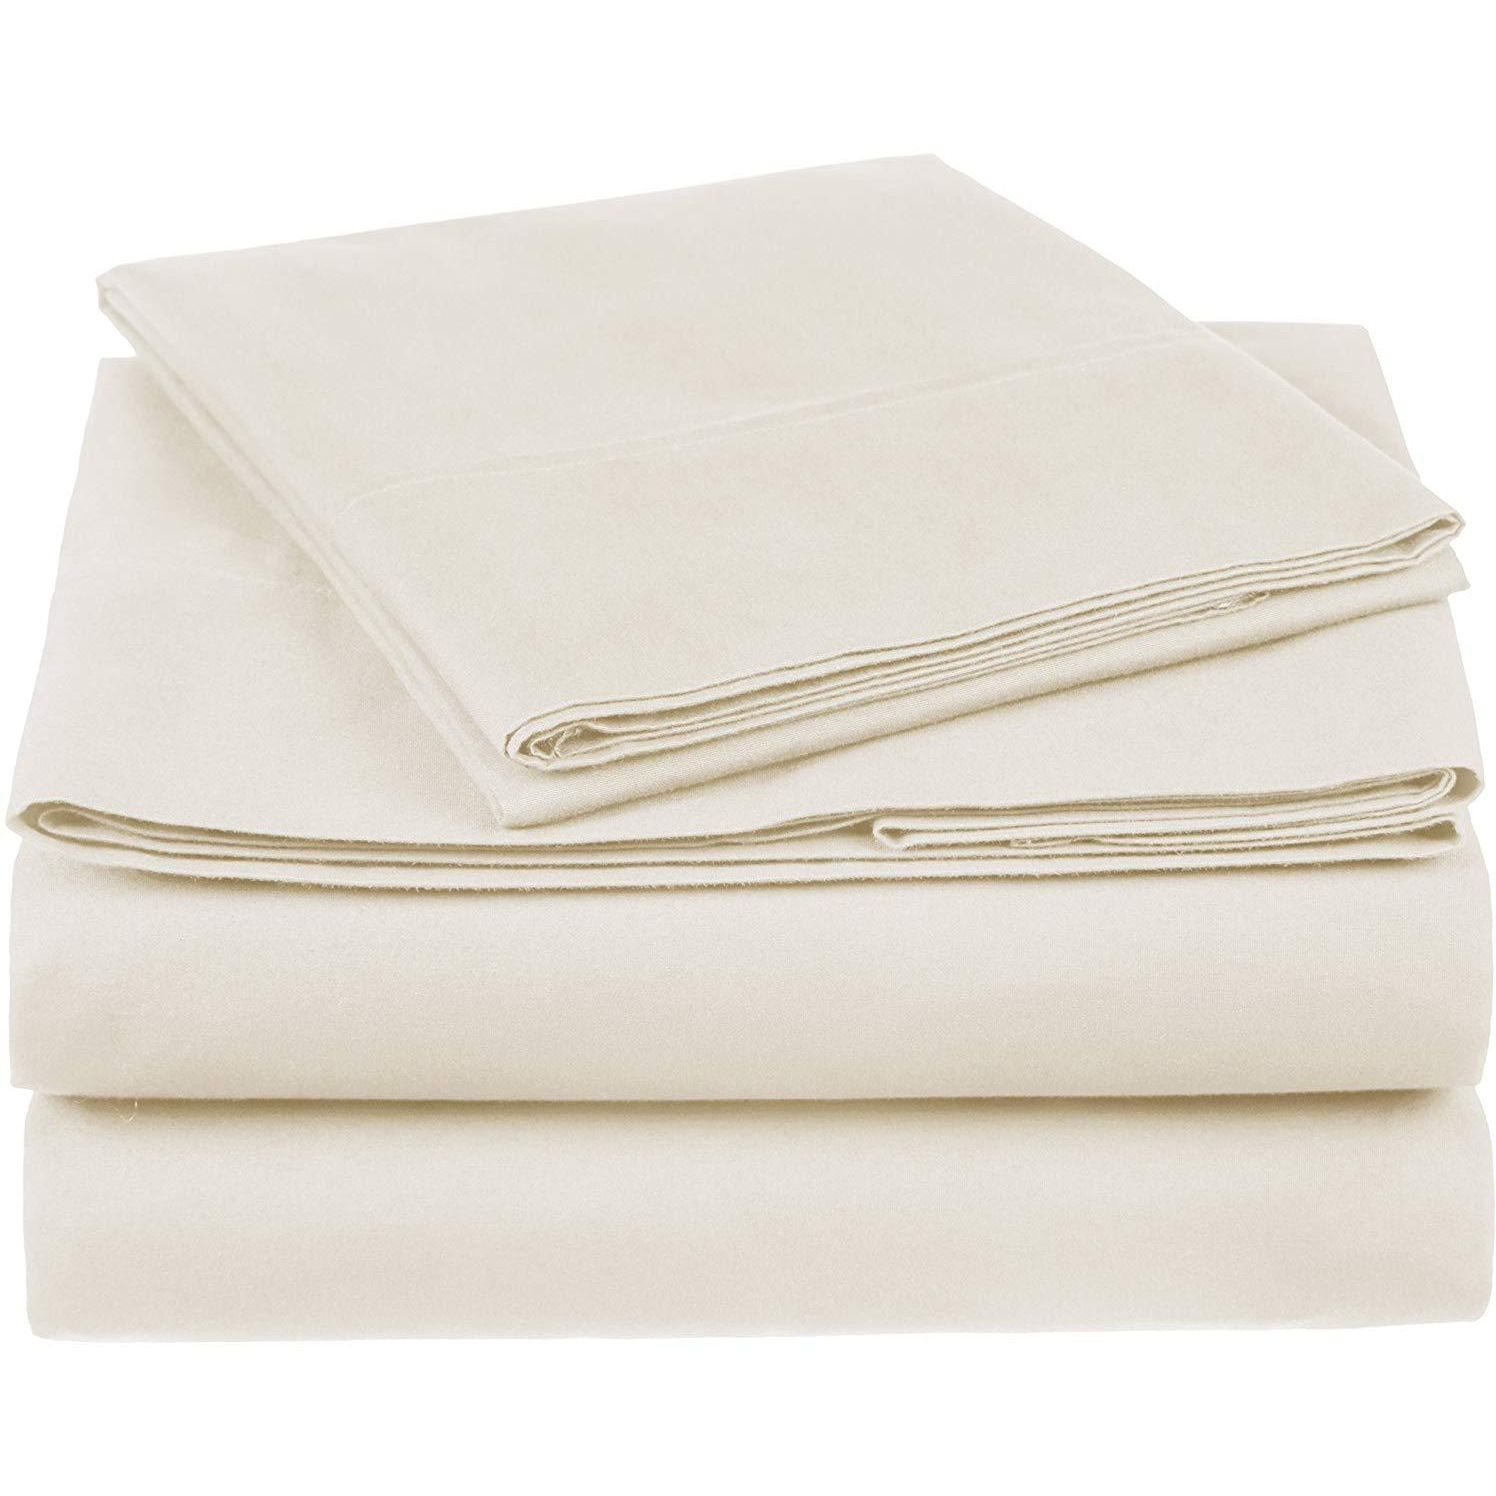 100% Cotton Sheet Set - 400 Thread Count (Piece:6 PIECE, Size:KING, Color:TAUPE)